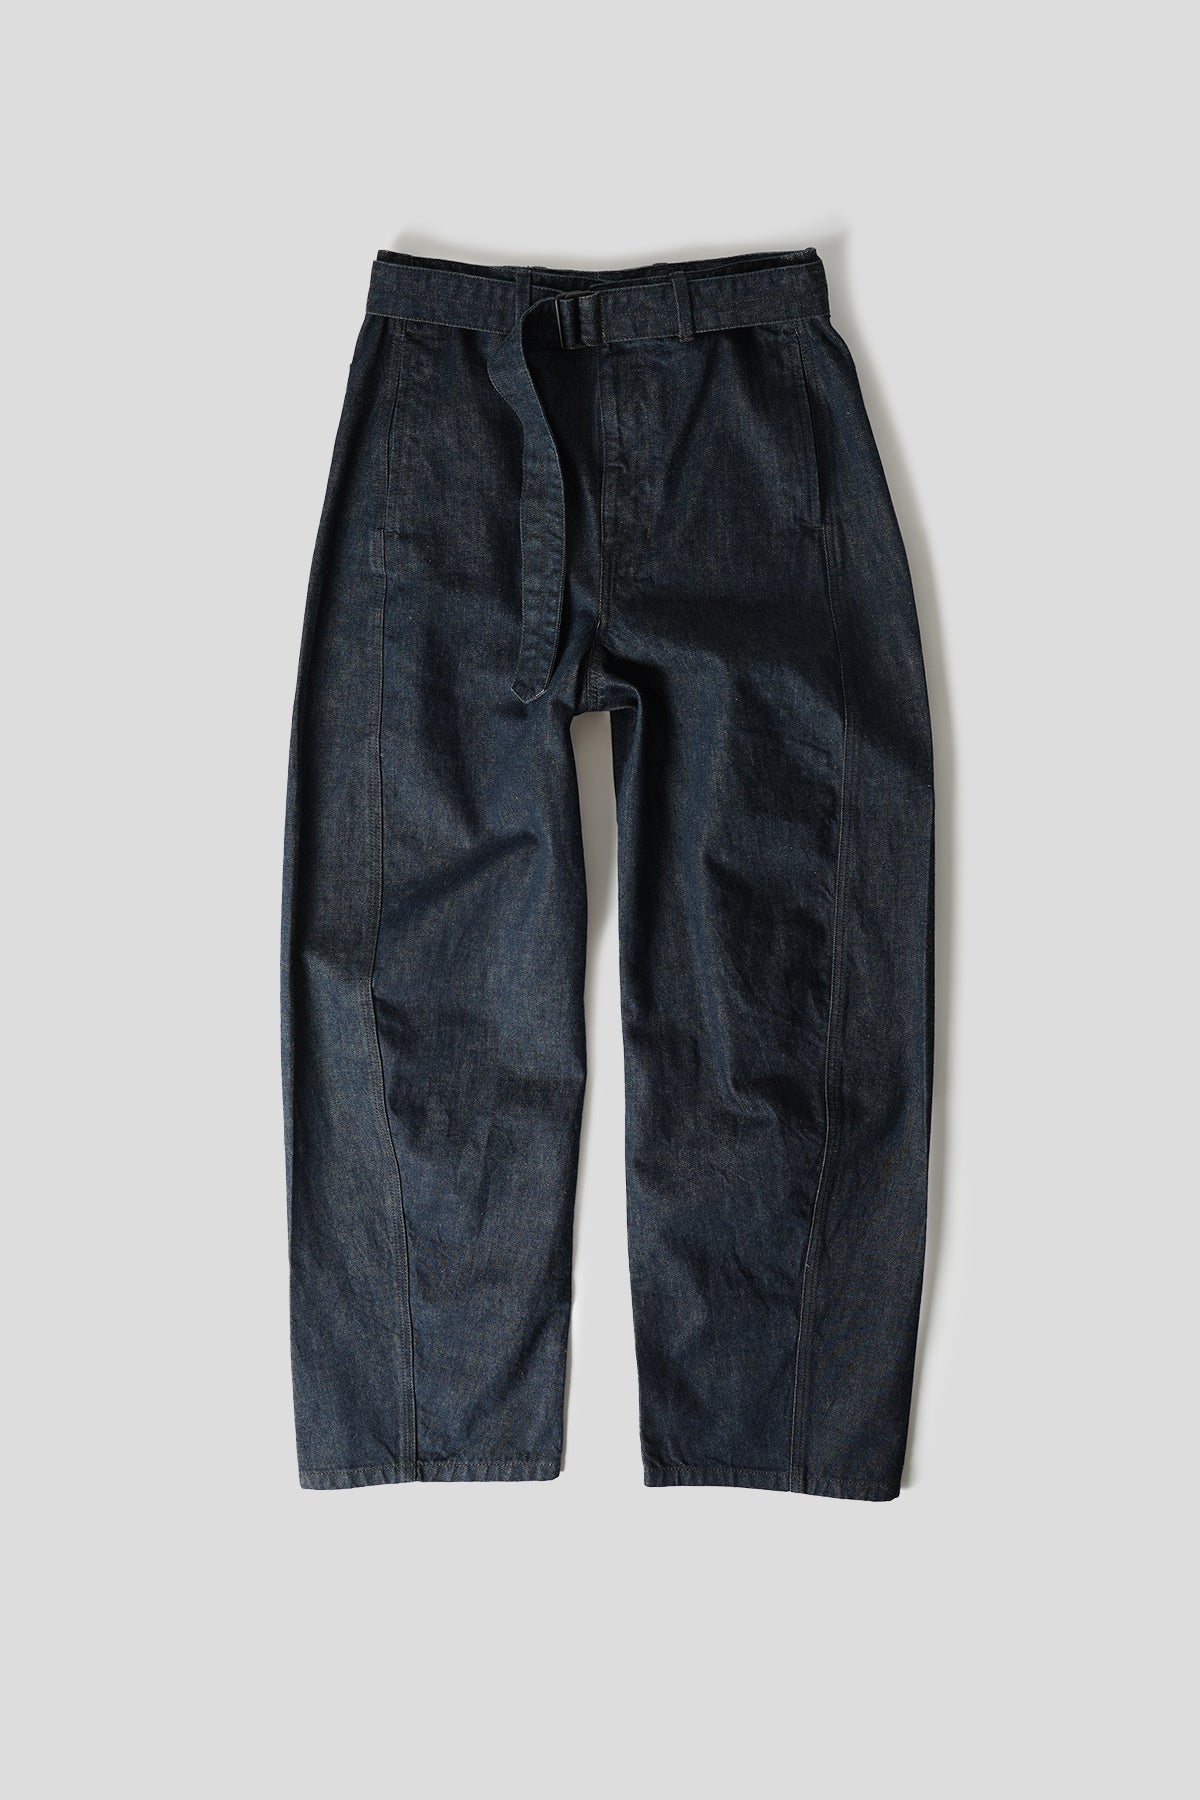 LEMAIRE - TWISTED BELTED INDIGO TROUSERS - LE LABO STORE